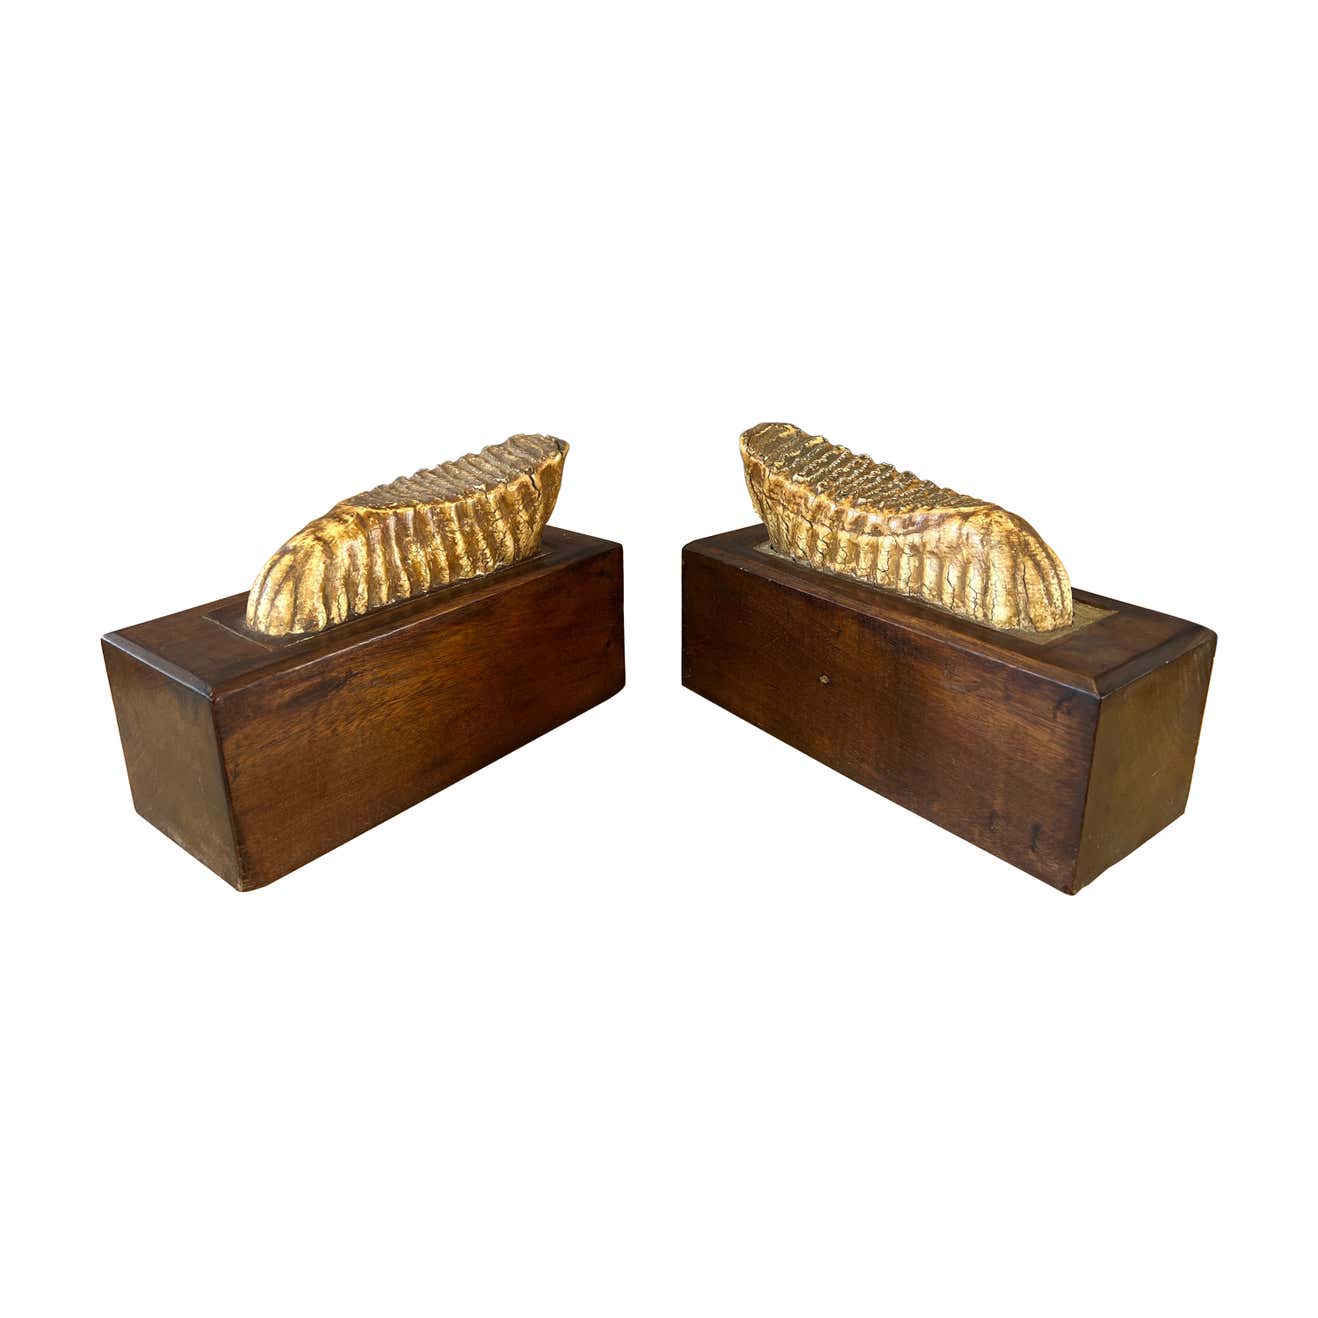 Pair of Vintage Brass Shell Bookends, Scallop Shell Bookends